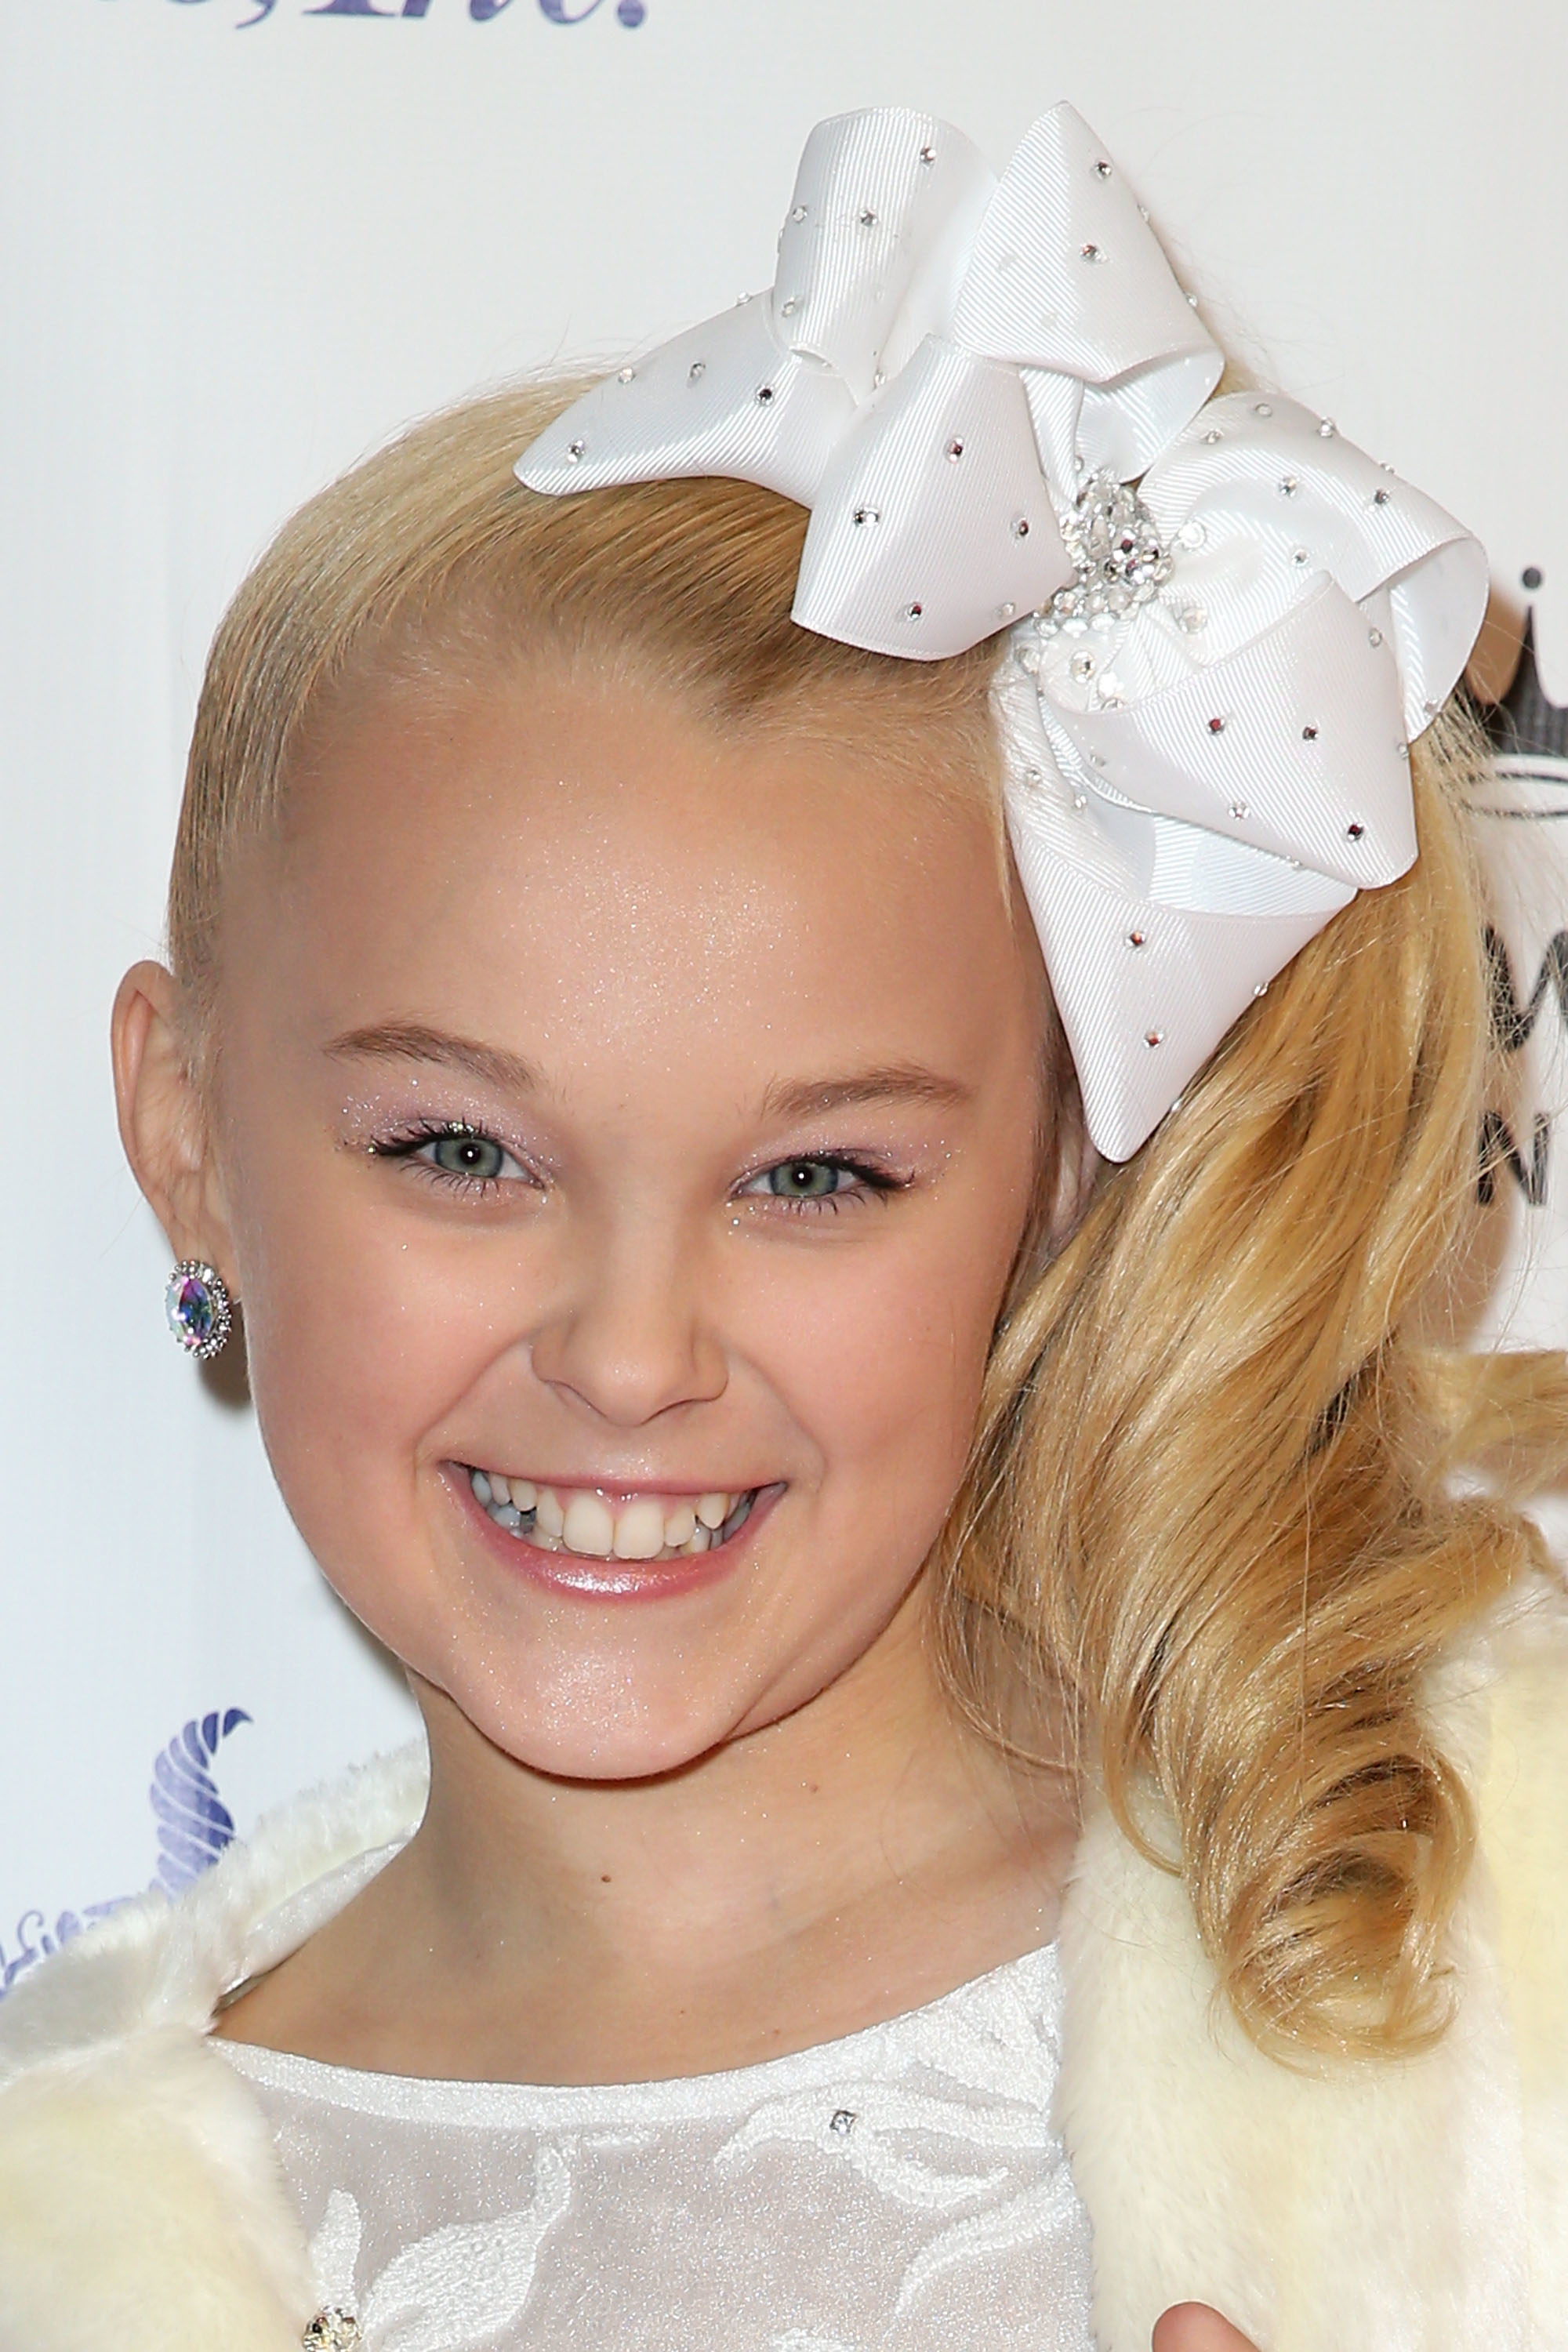 JoJo Siwa smiling, wearing a large bow, earrings, and a faux fur shawl over a dress